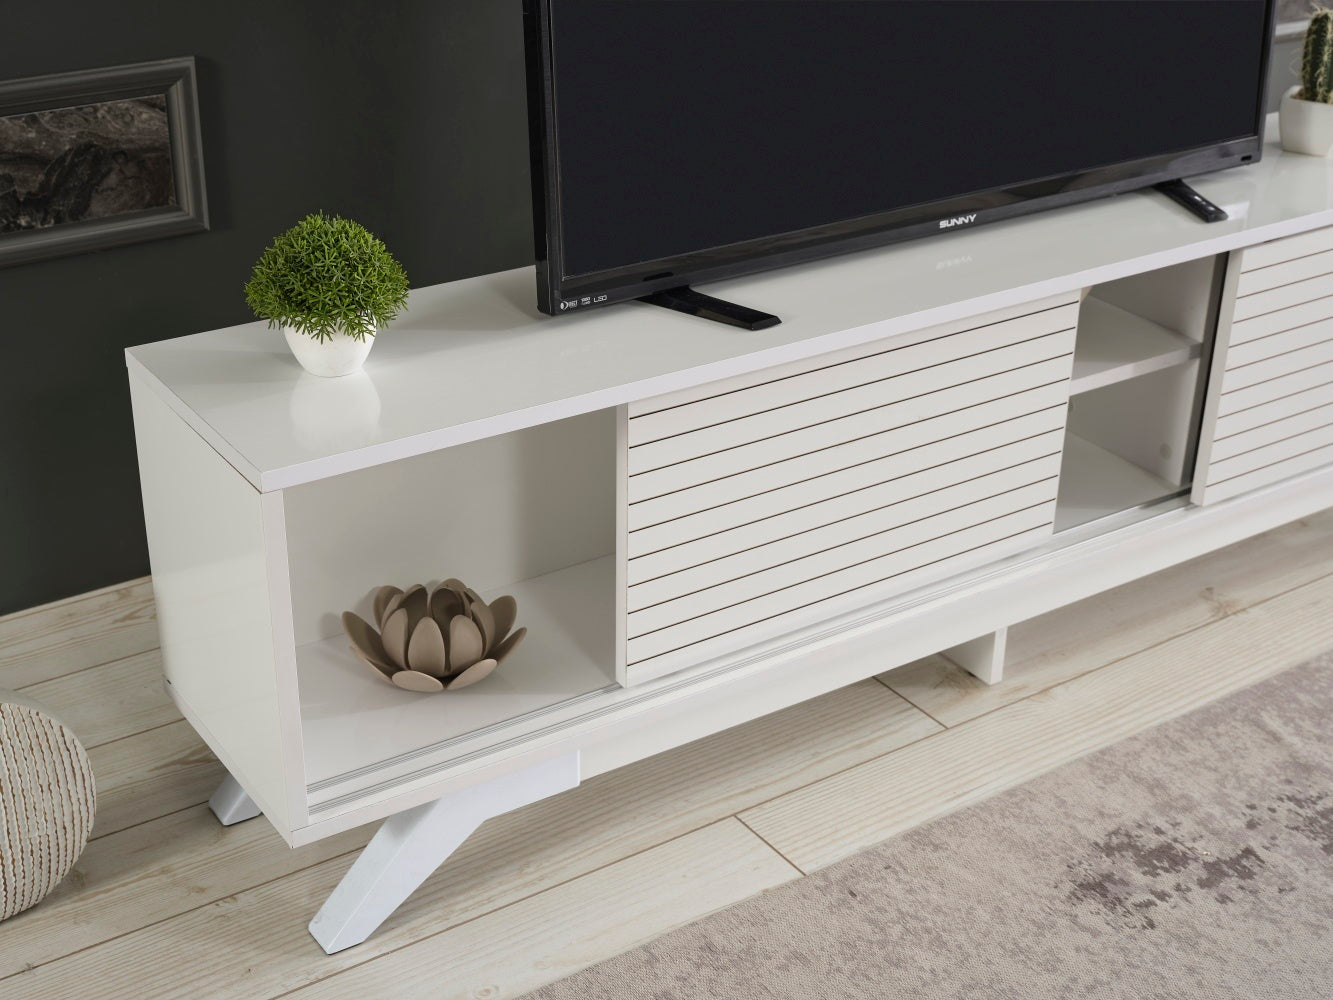 FurnisHome Store Luxia Mid Century Modern Tv Stand 2 Sliding Door Cabinet 2 Shelves 67 inch Tv Uni, White - Enova Luxe Home Store